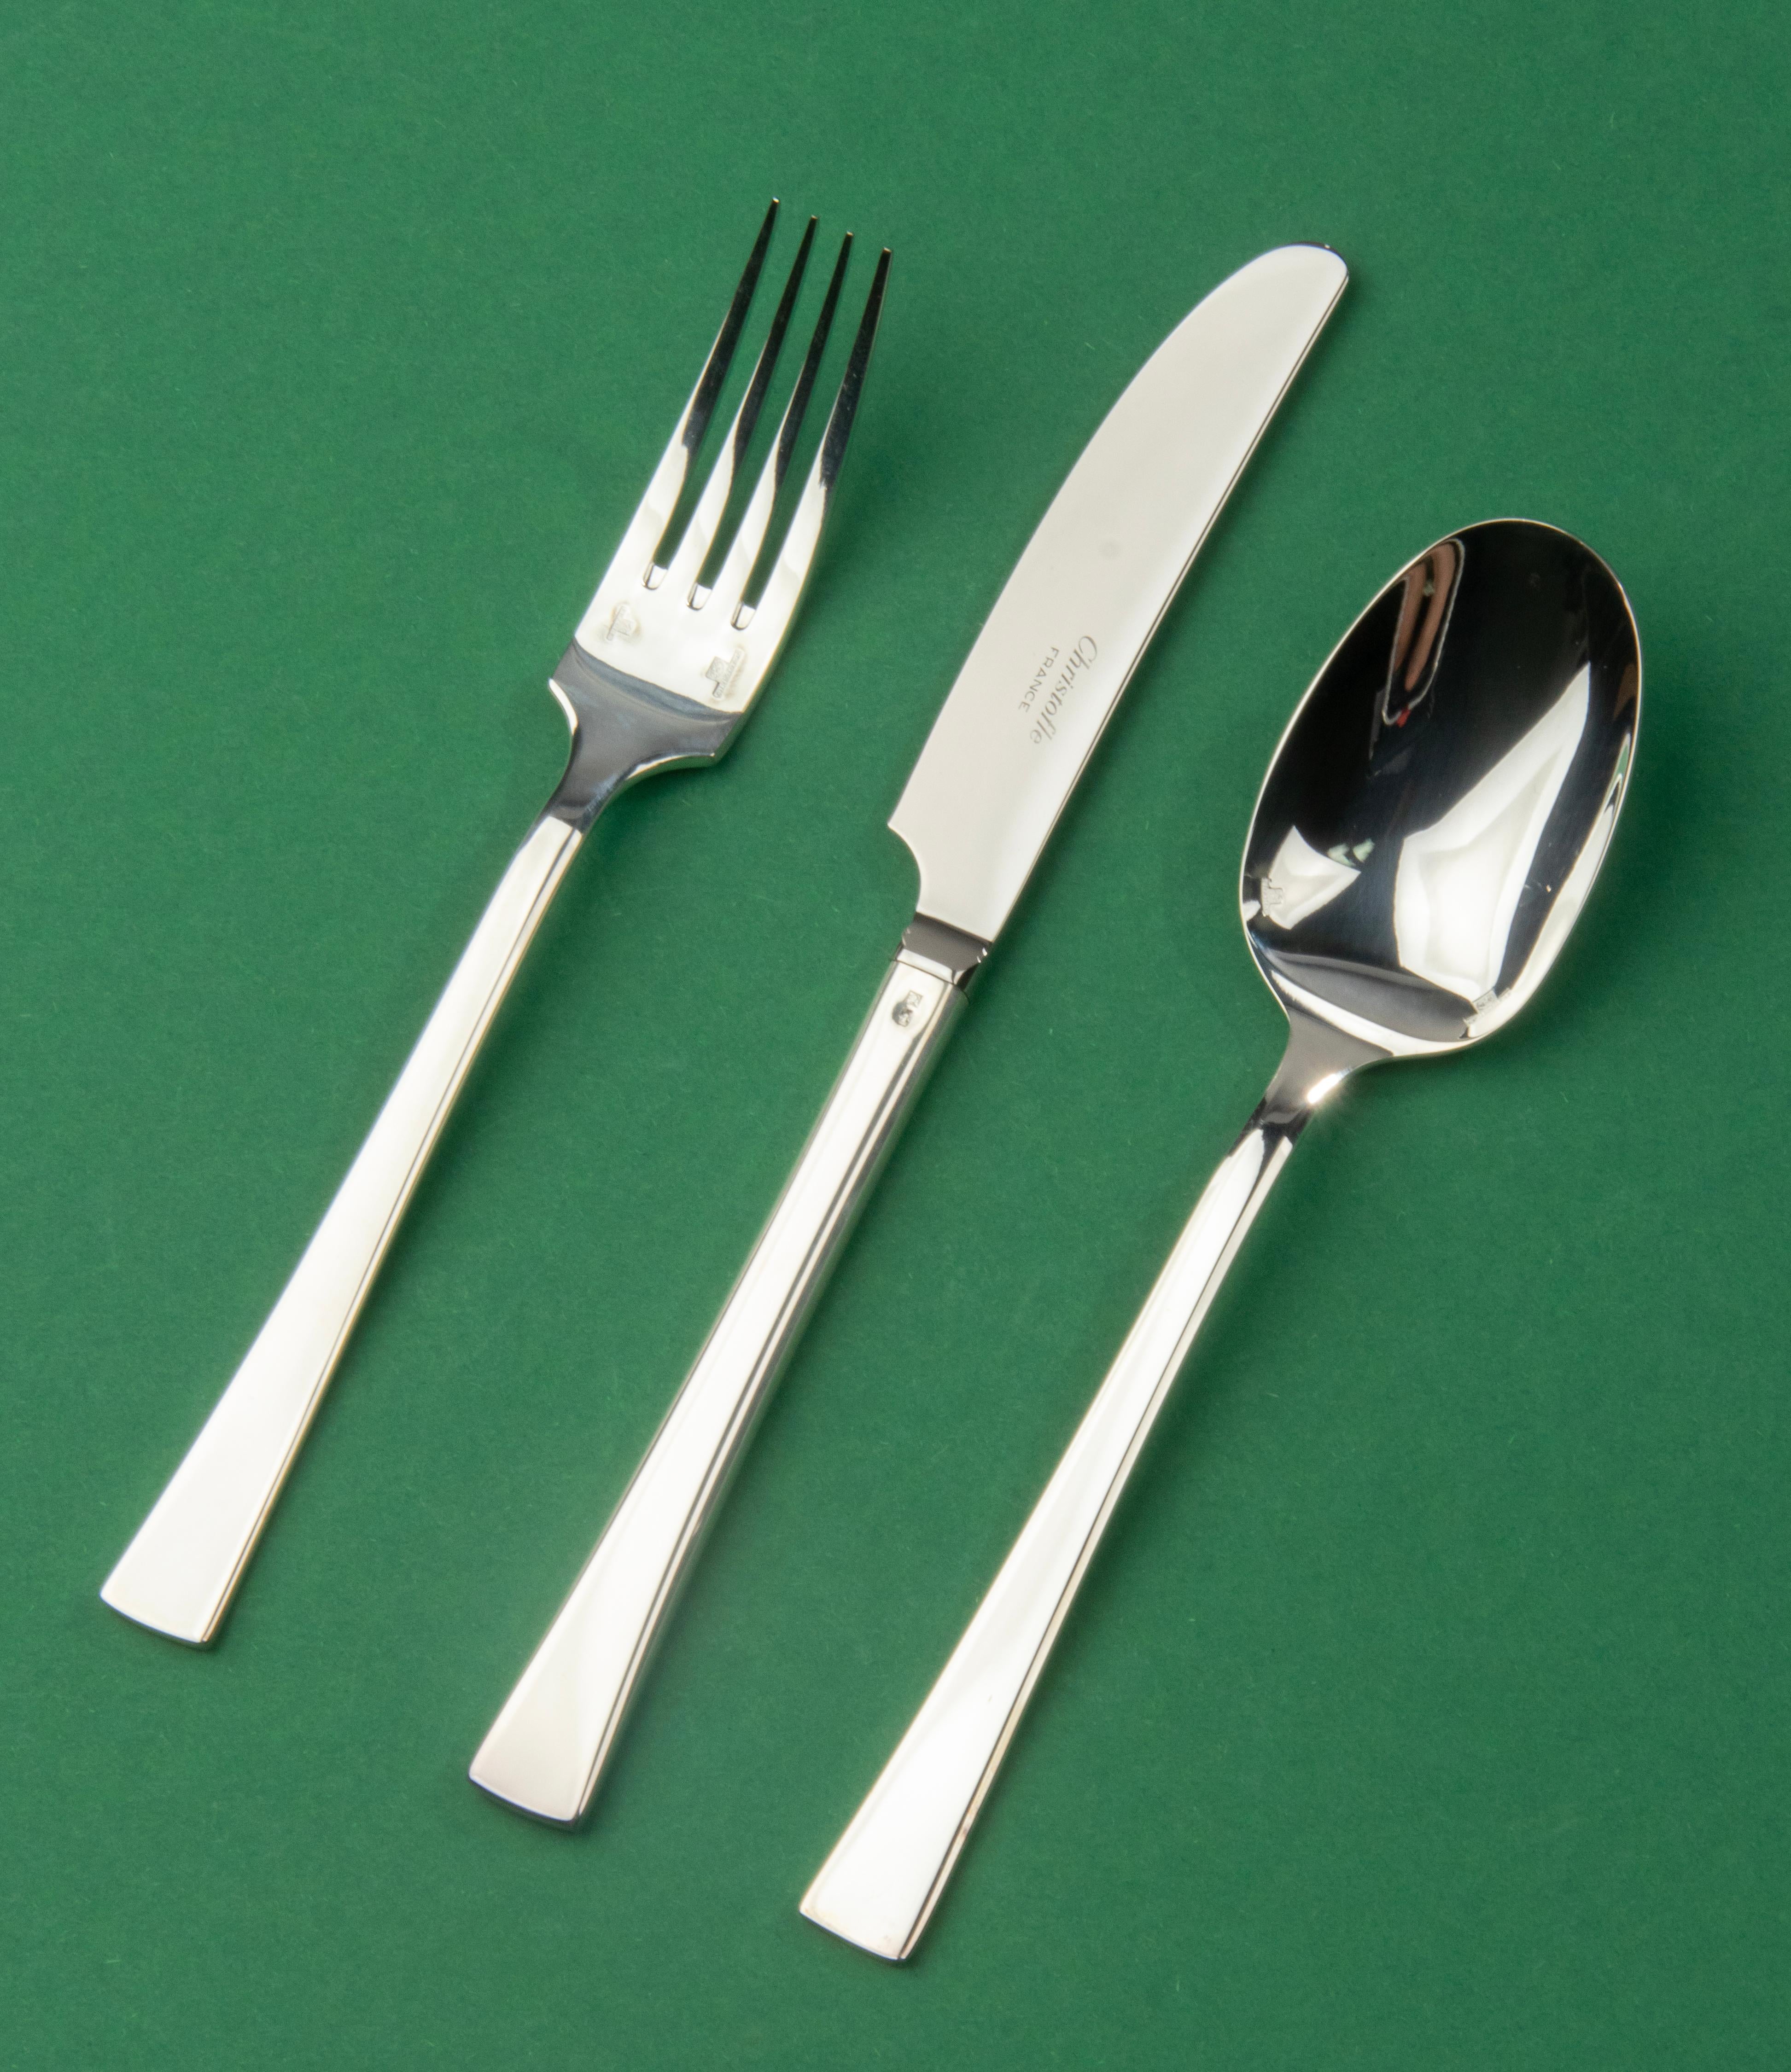 A beautiful set of silver plated flatware, made by the French brand Christofle, from the series Concorde. This set is in new condition, all pieces are packed and sealed in the original Christofle blisters, only three pieces have been taken out for